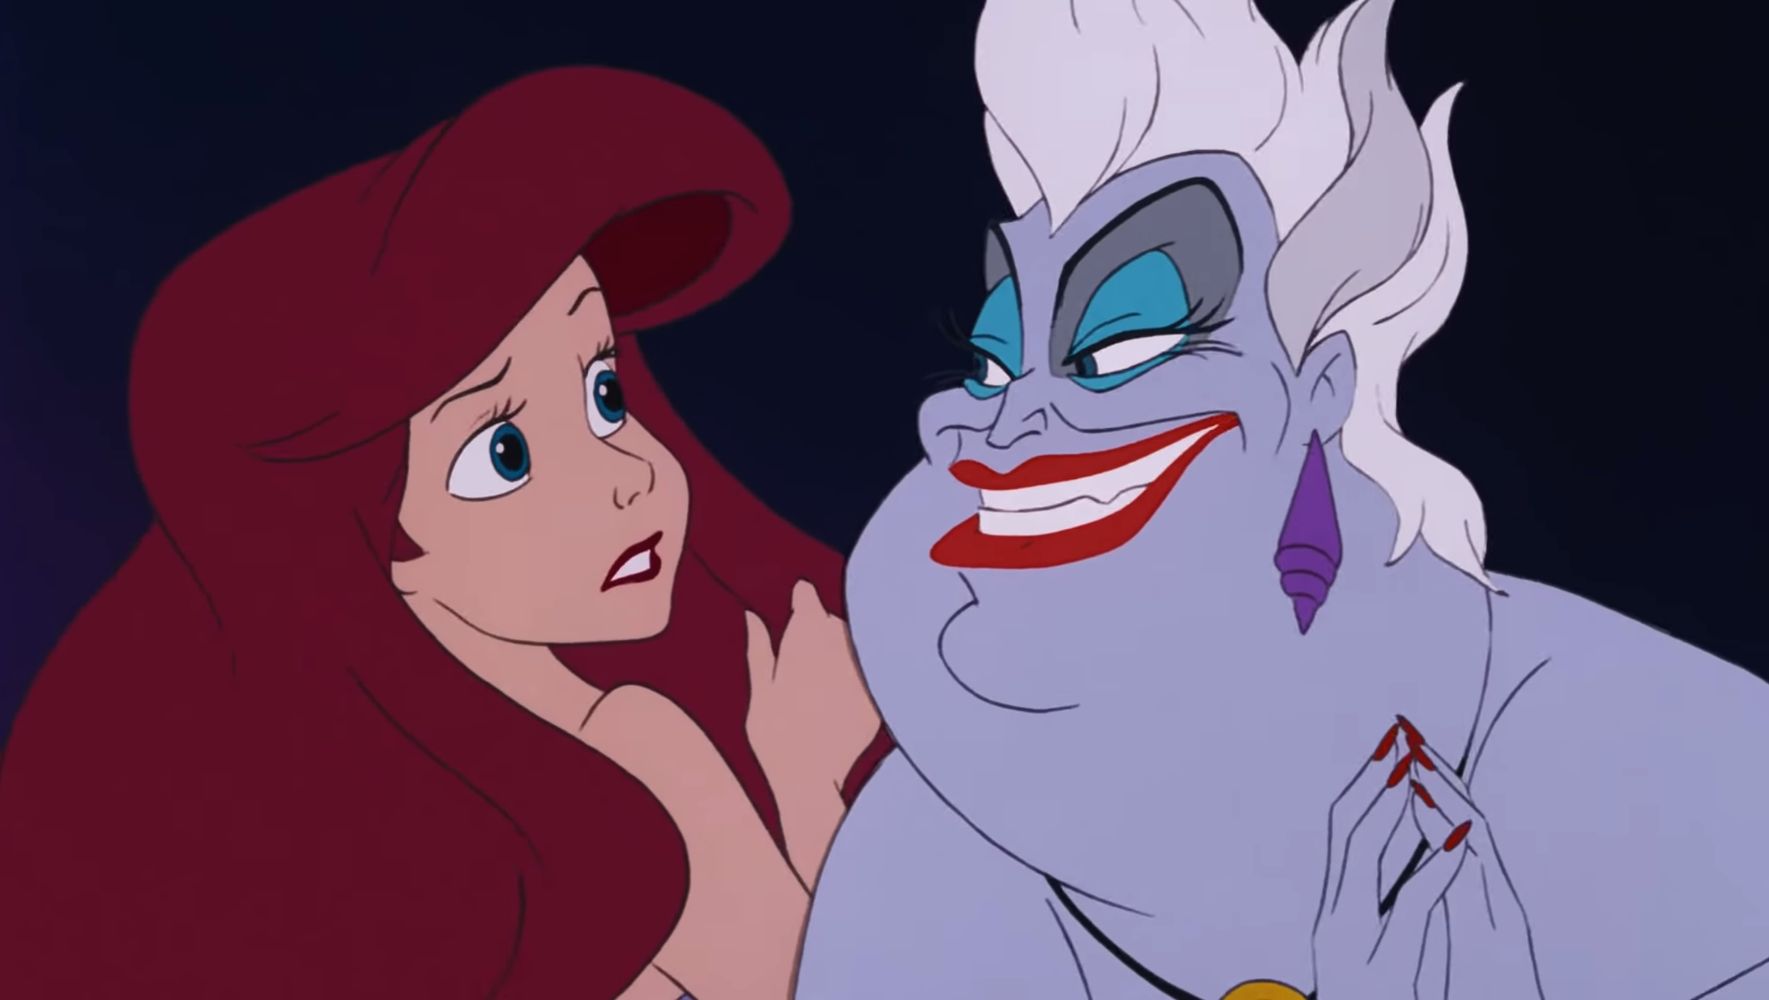 How The Little Mermaid Found A Place In The Hearts Of LGBTQ Fans